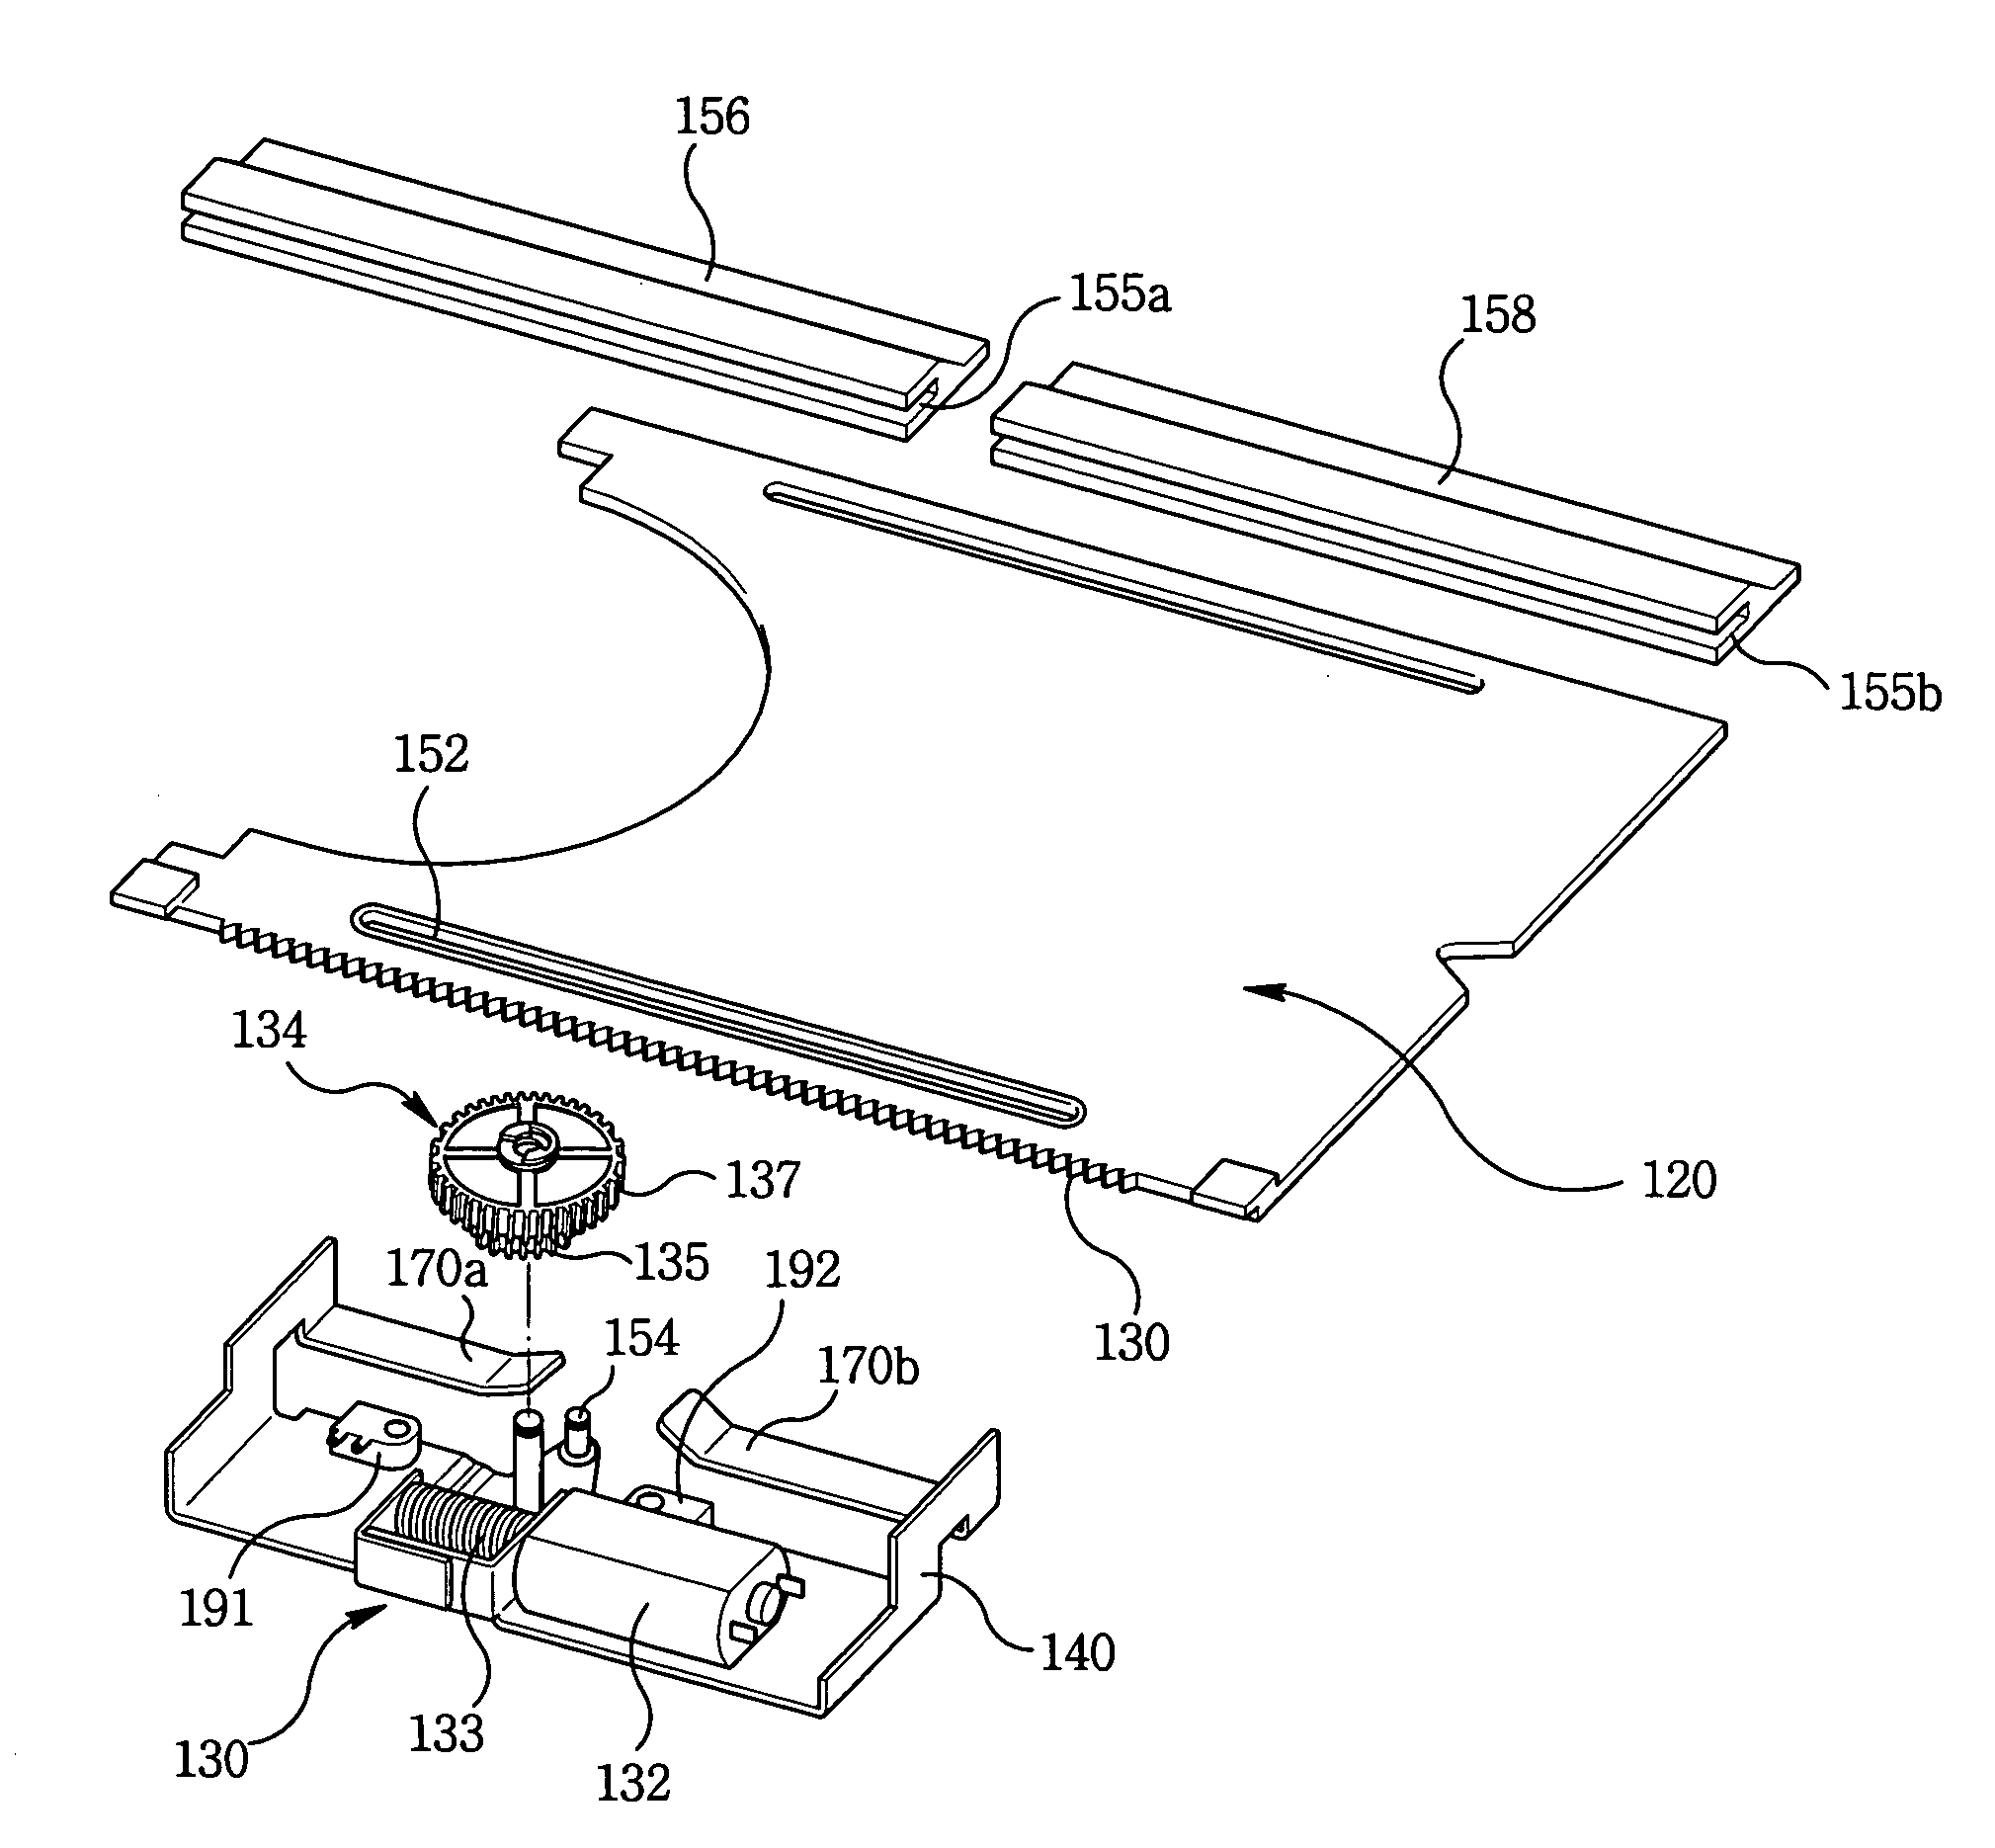 Shutter opening and closing apparatus for beam projector